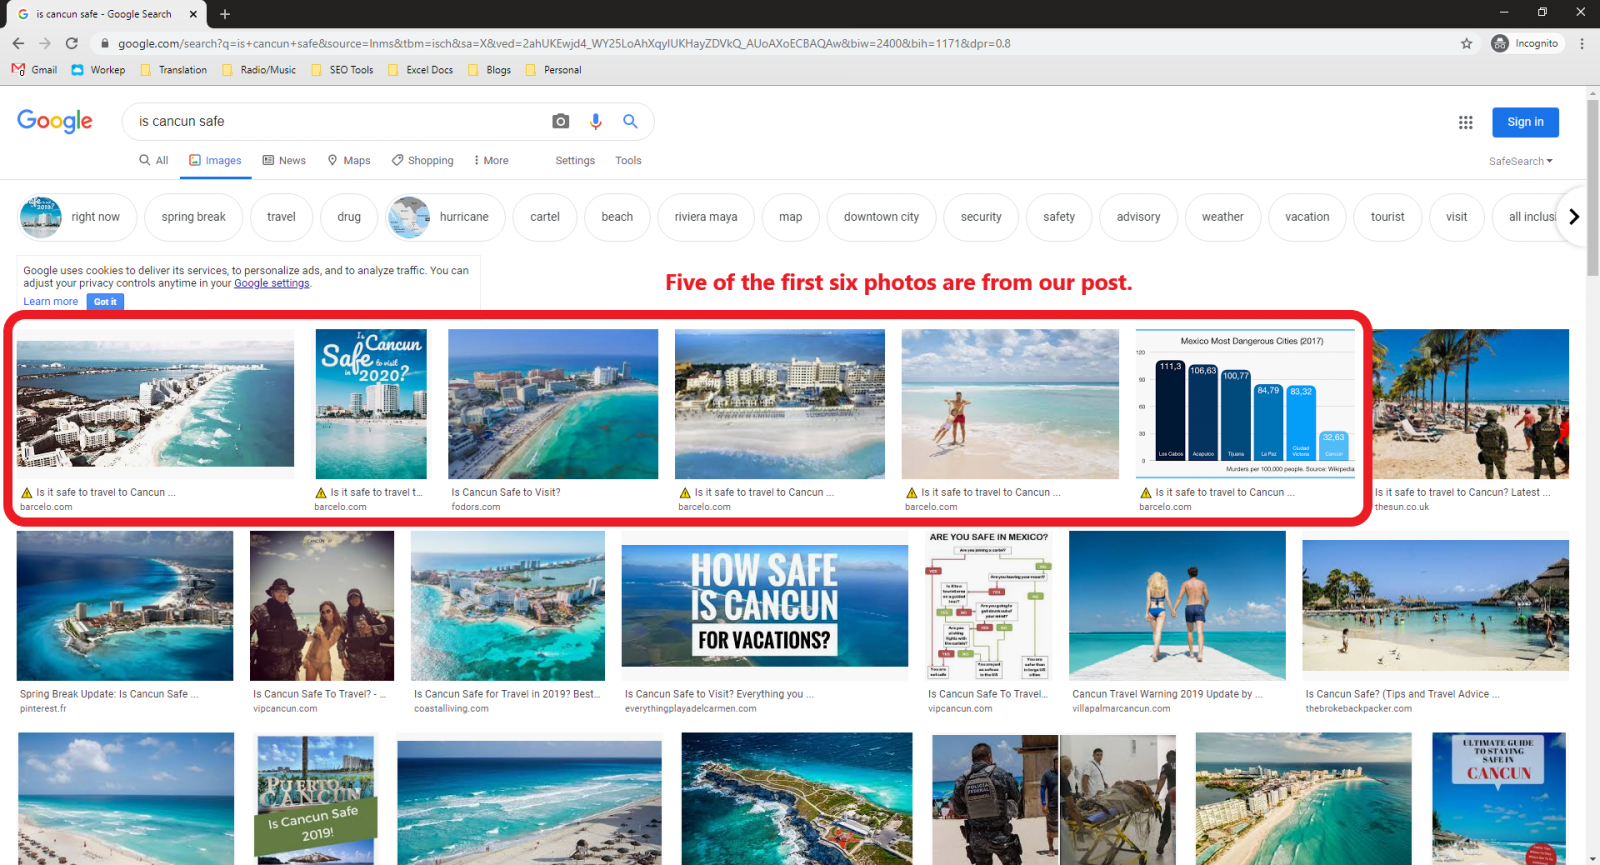 image results for "is Cancun safe" Google search